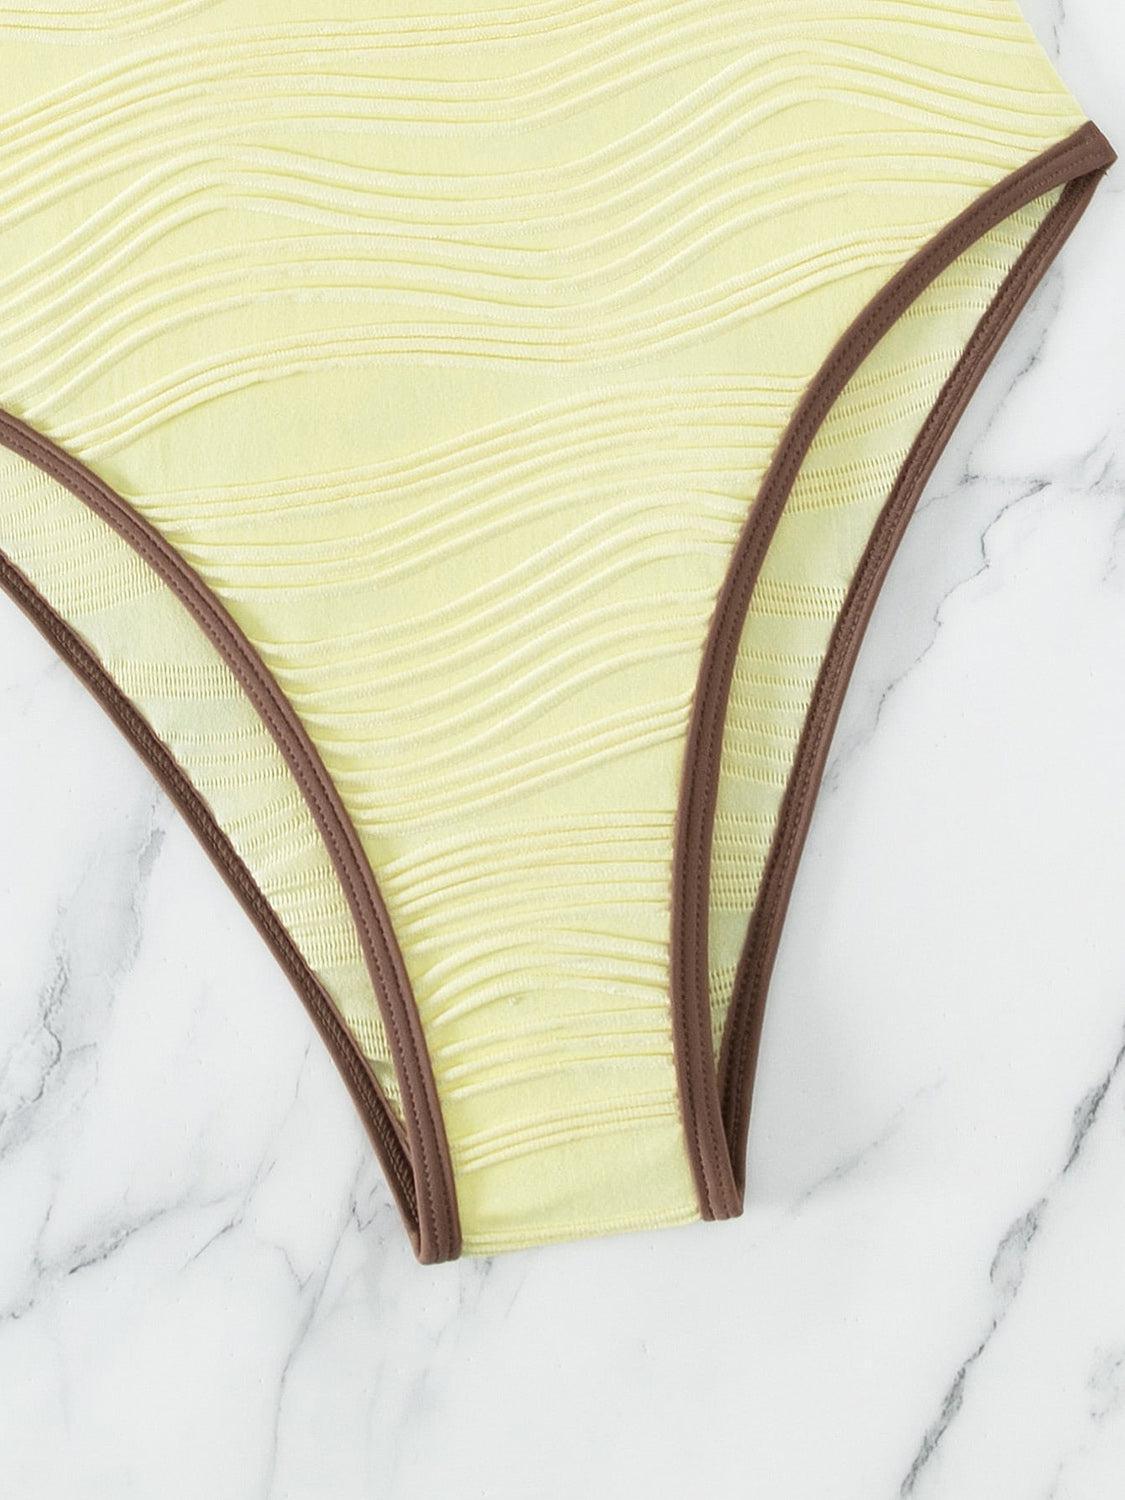 a women's yellow and brown bikini bottom on a marble surface